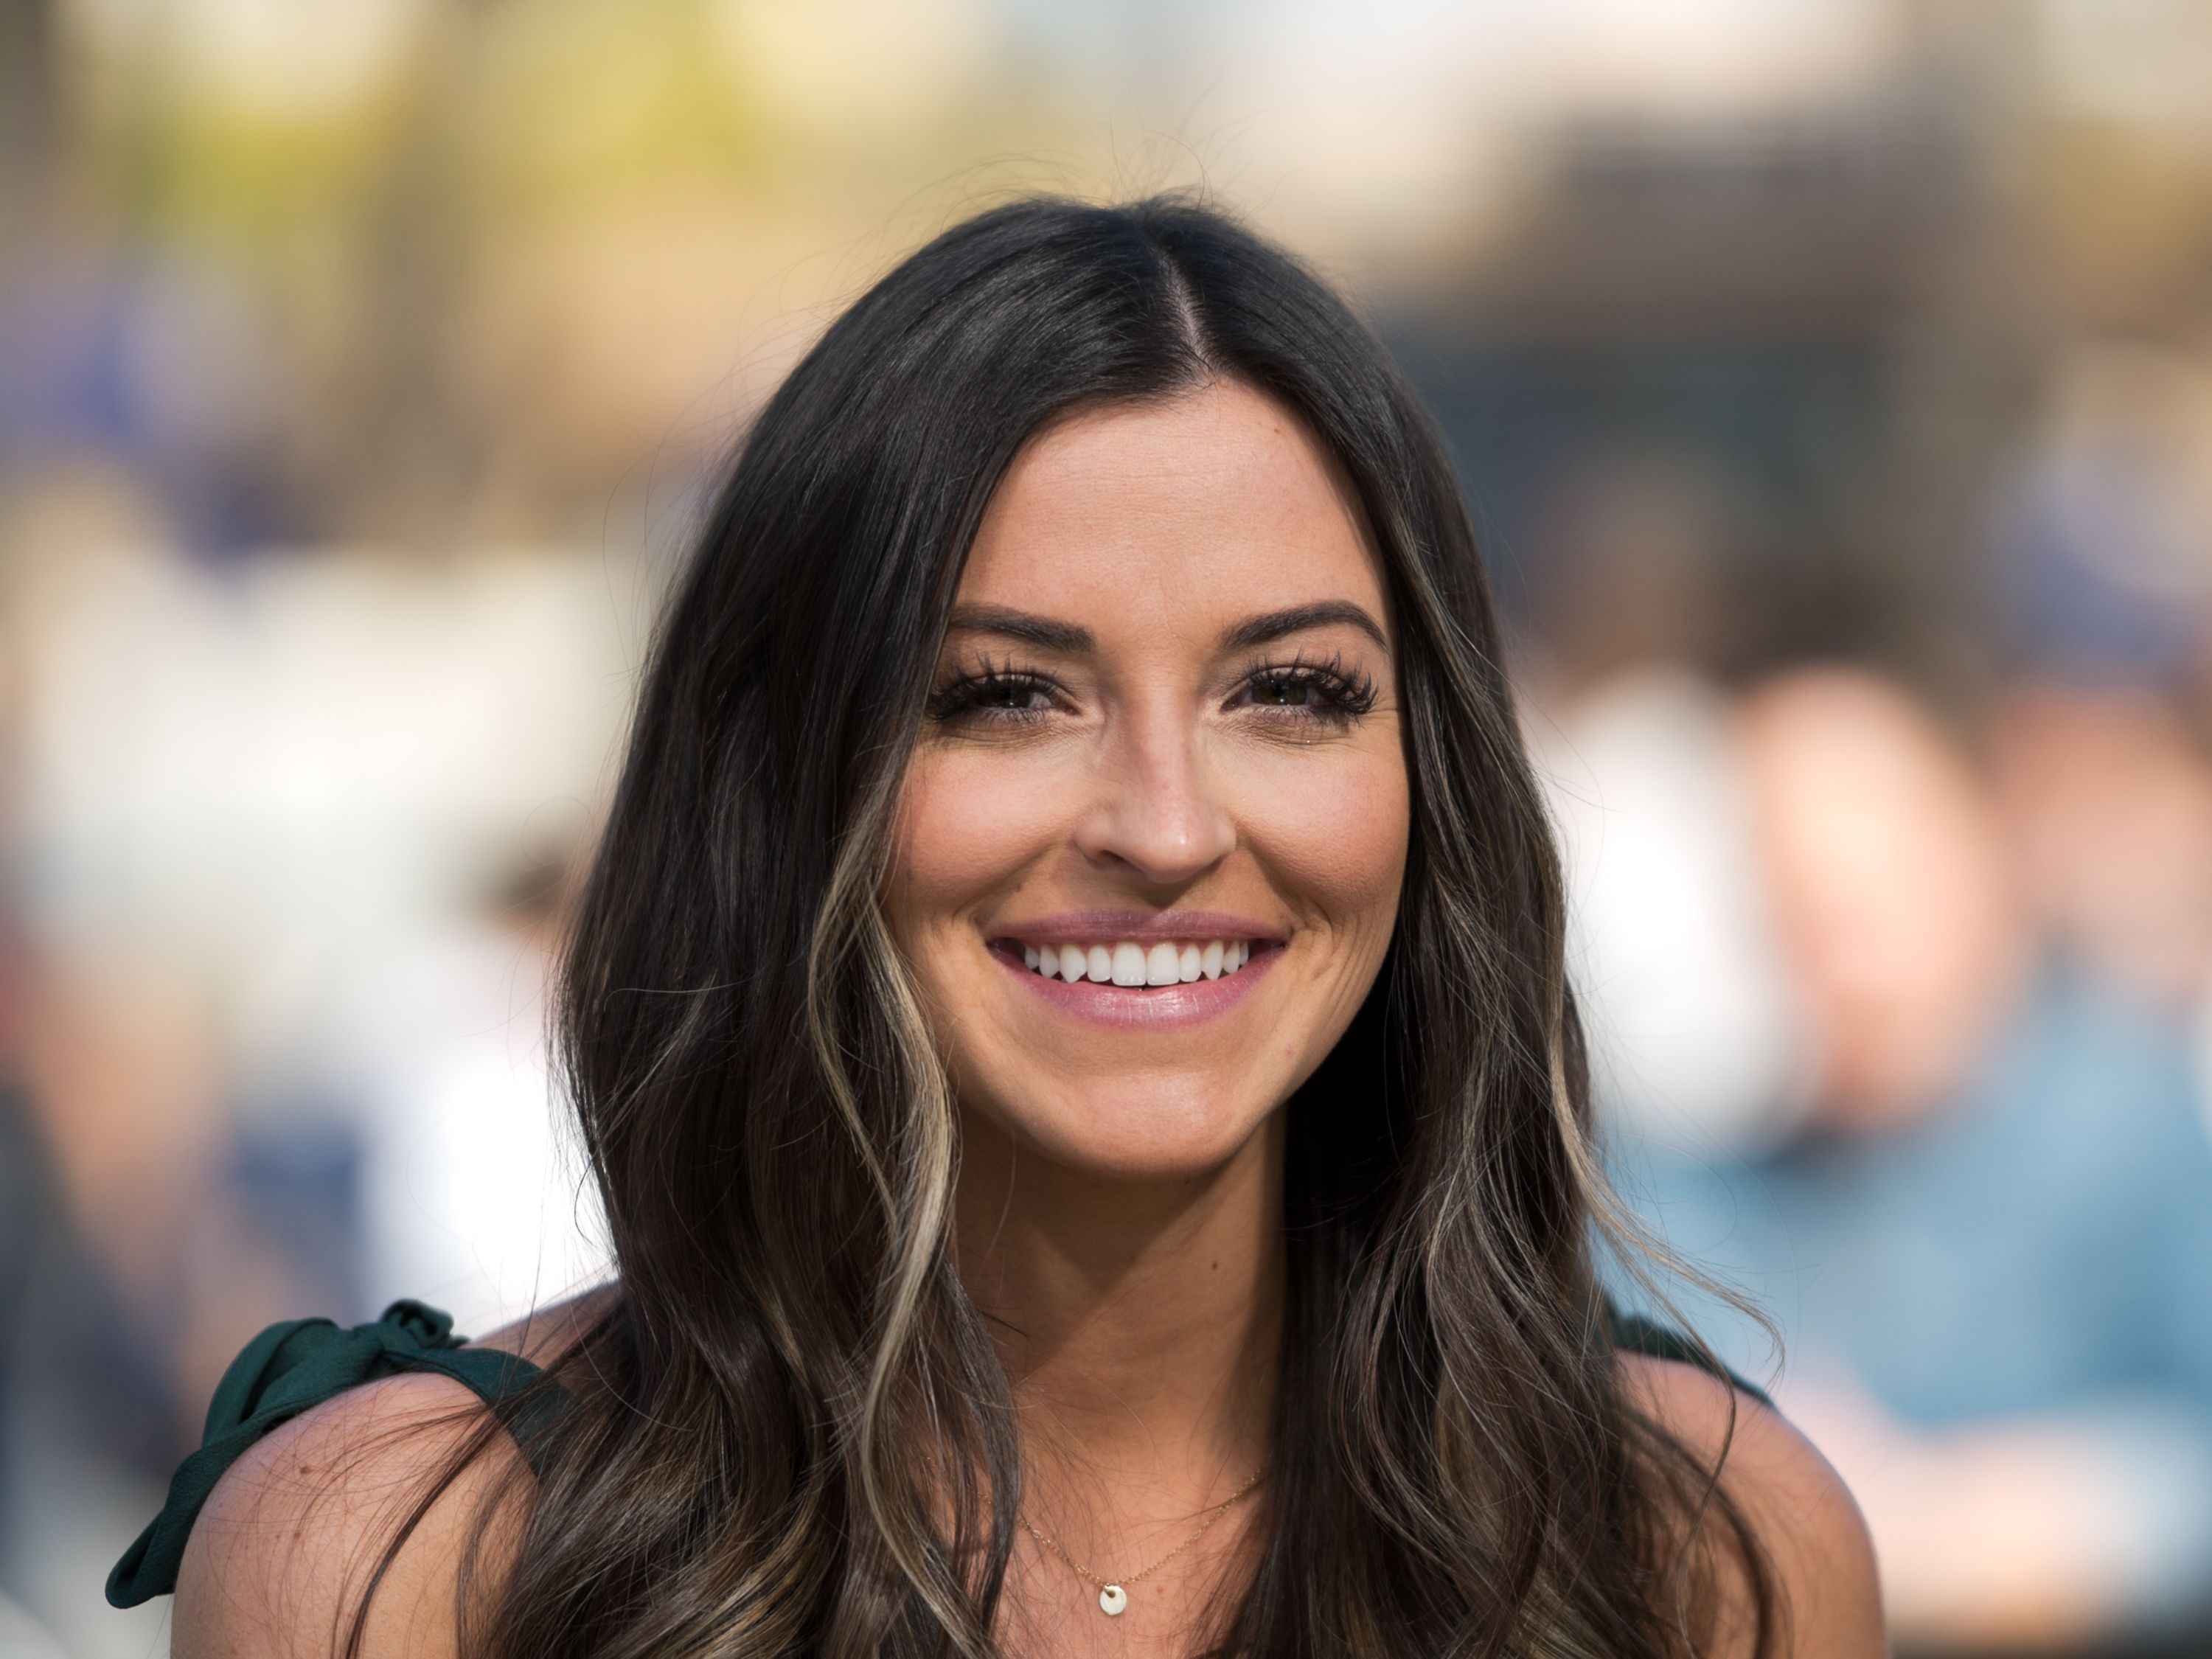 Tia Booth Is Over Bachelor Ex Colton Underwood And Has A Hot New